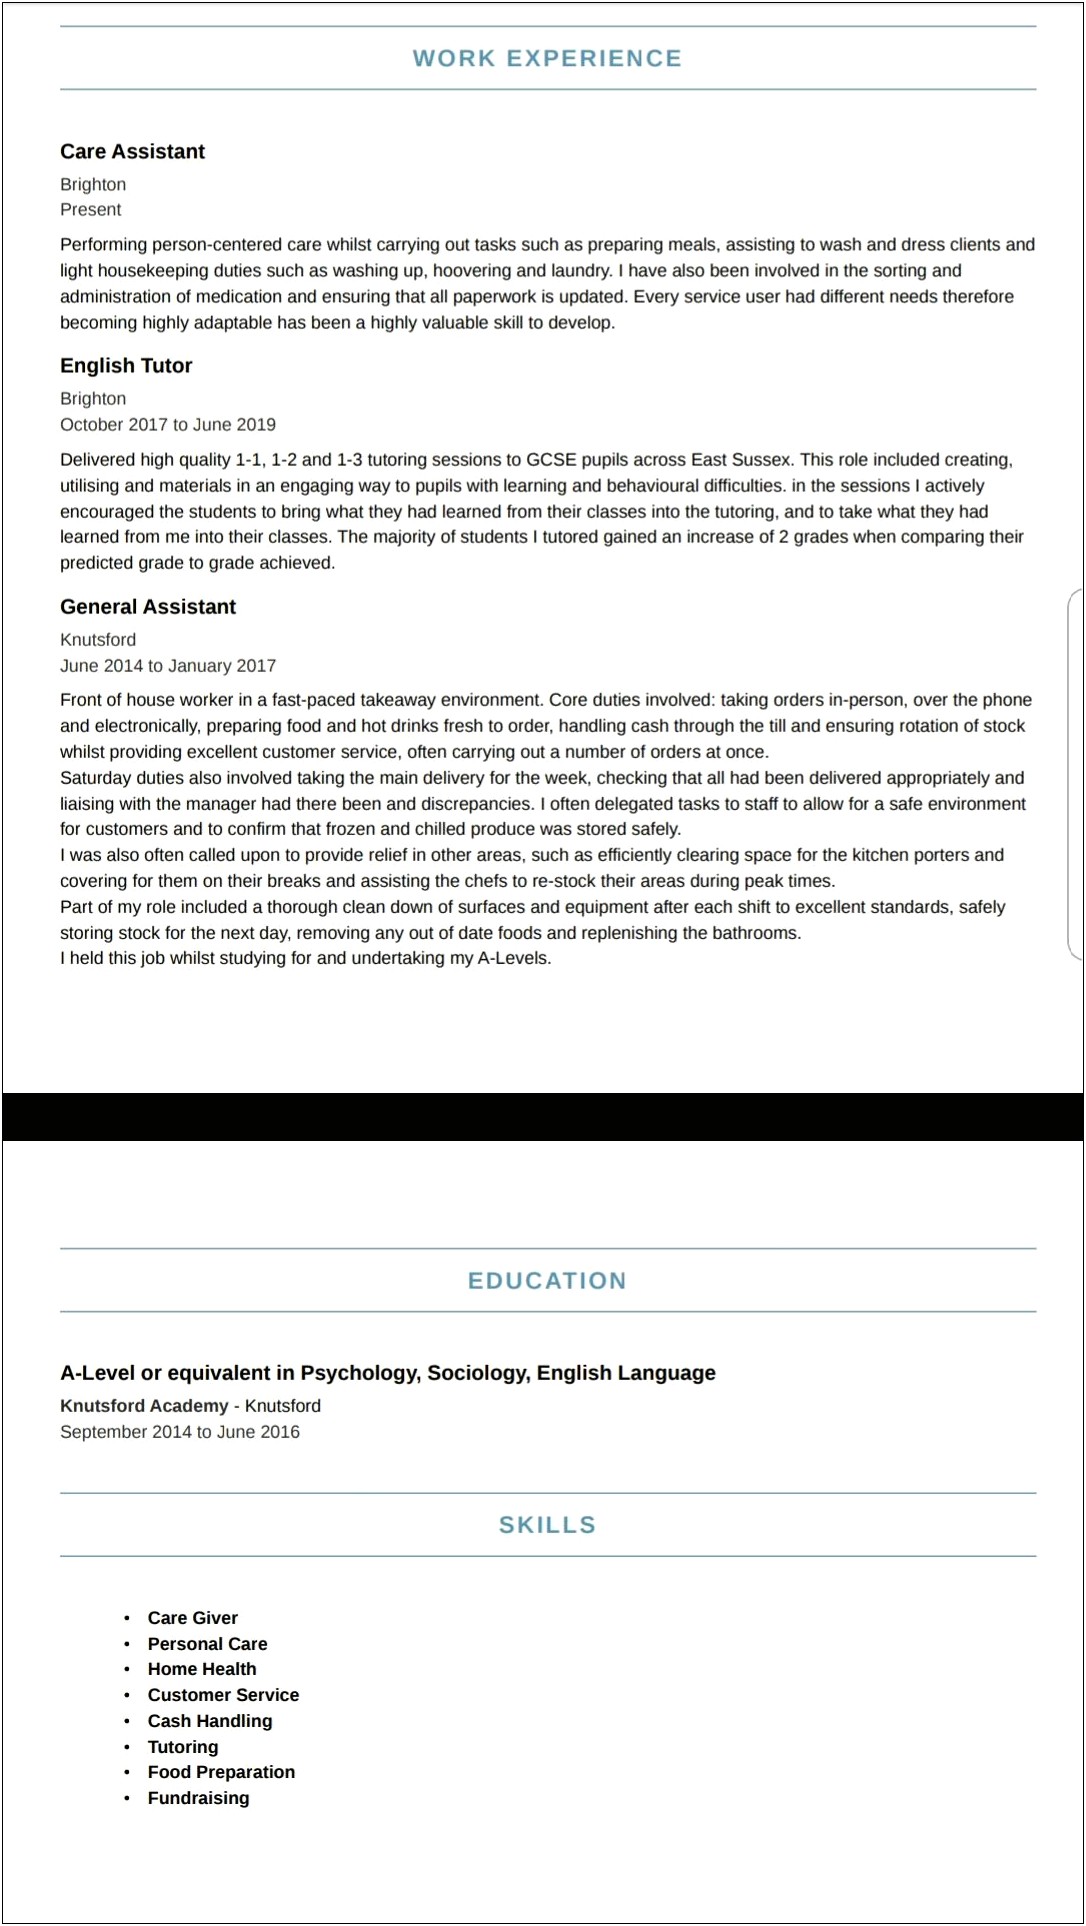 Skill Resume For Personal Care Assistant